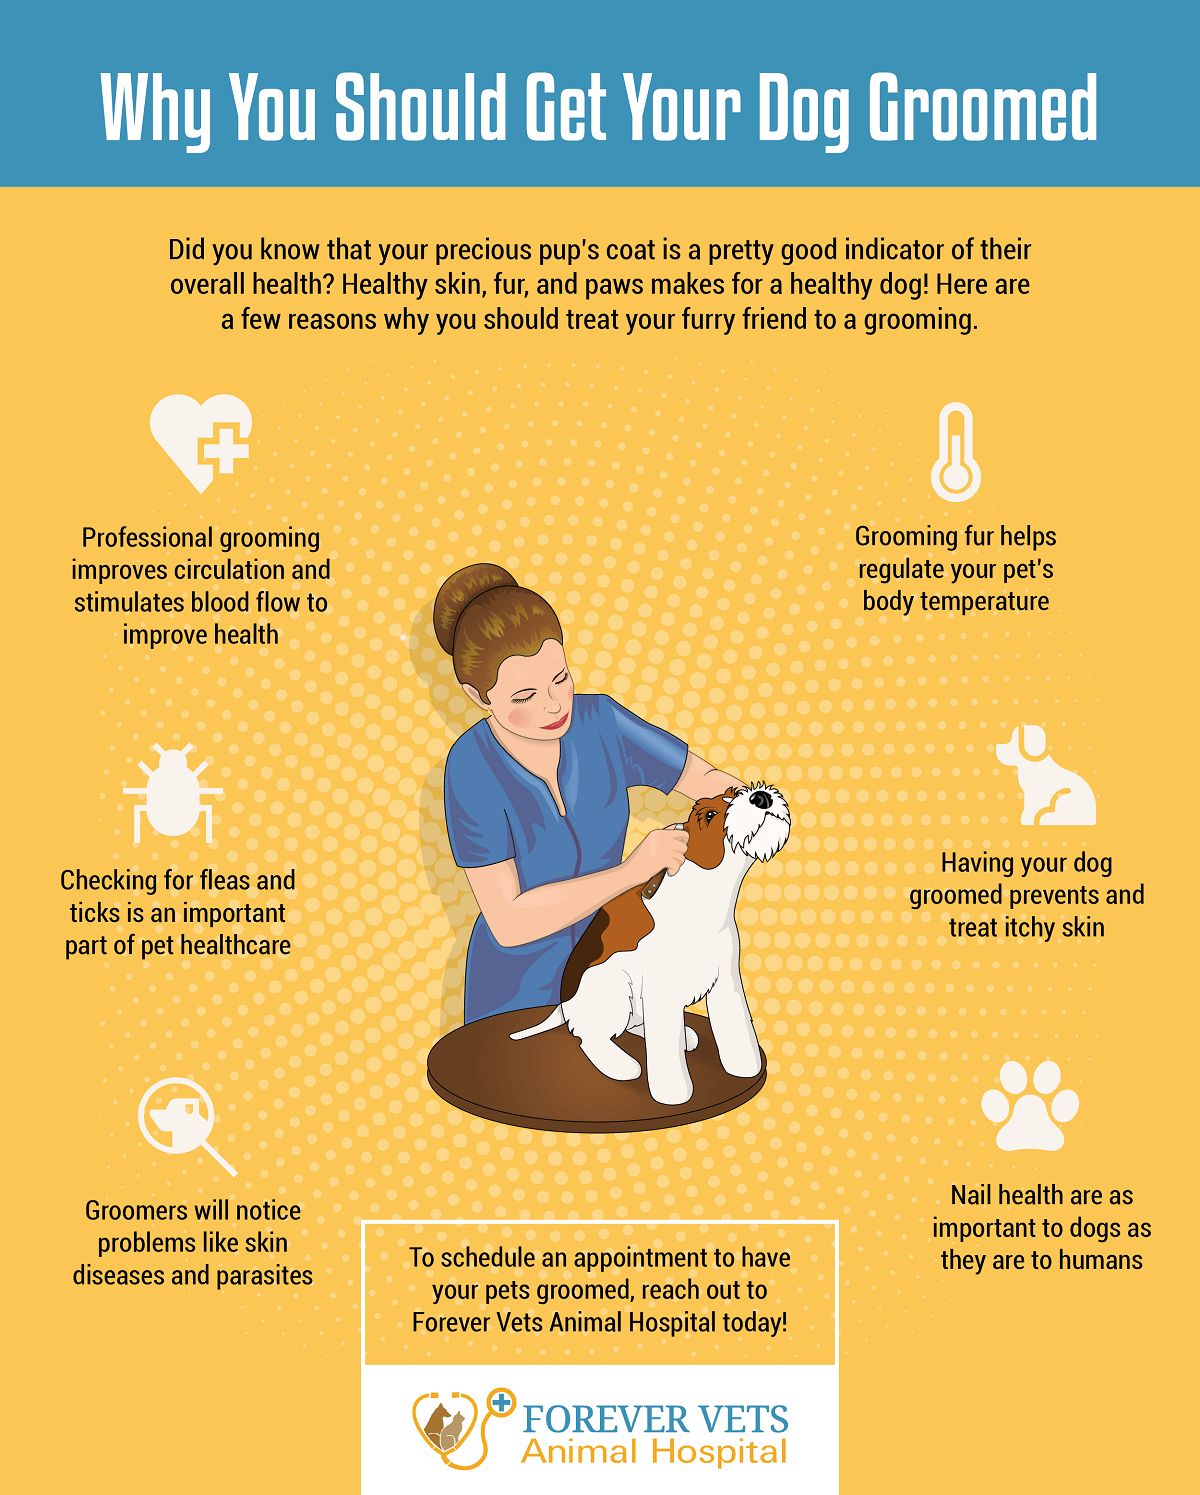 Why You Should Get Your Dog Groomed | Forever Vets